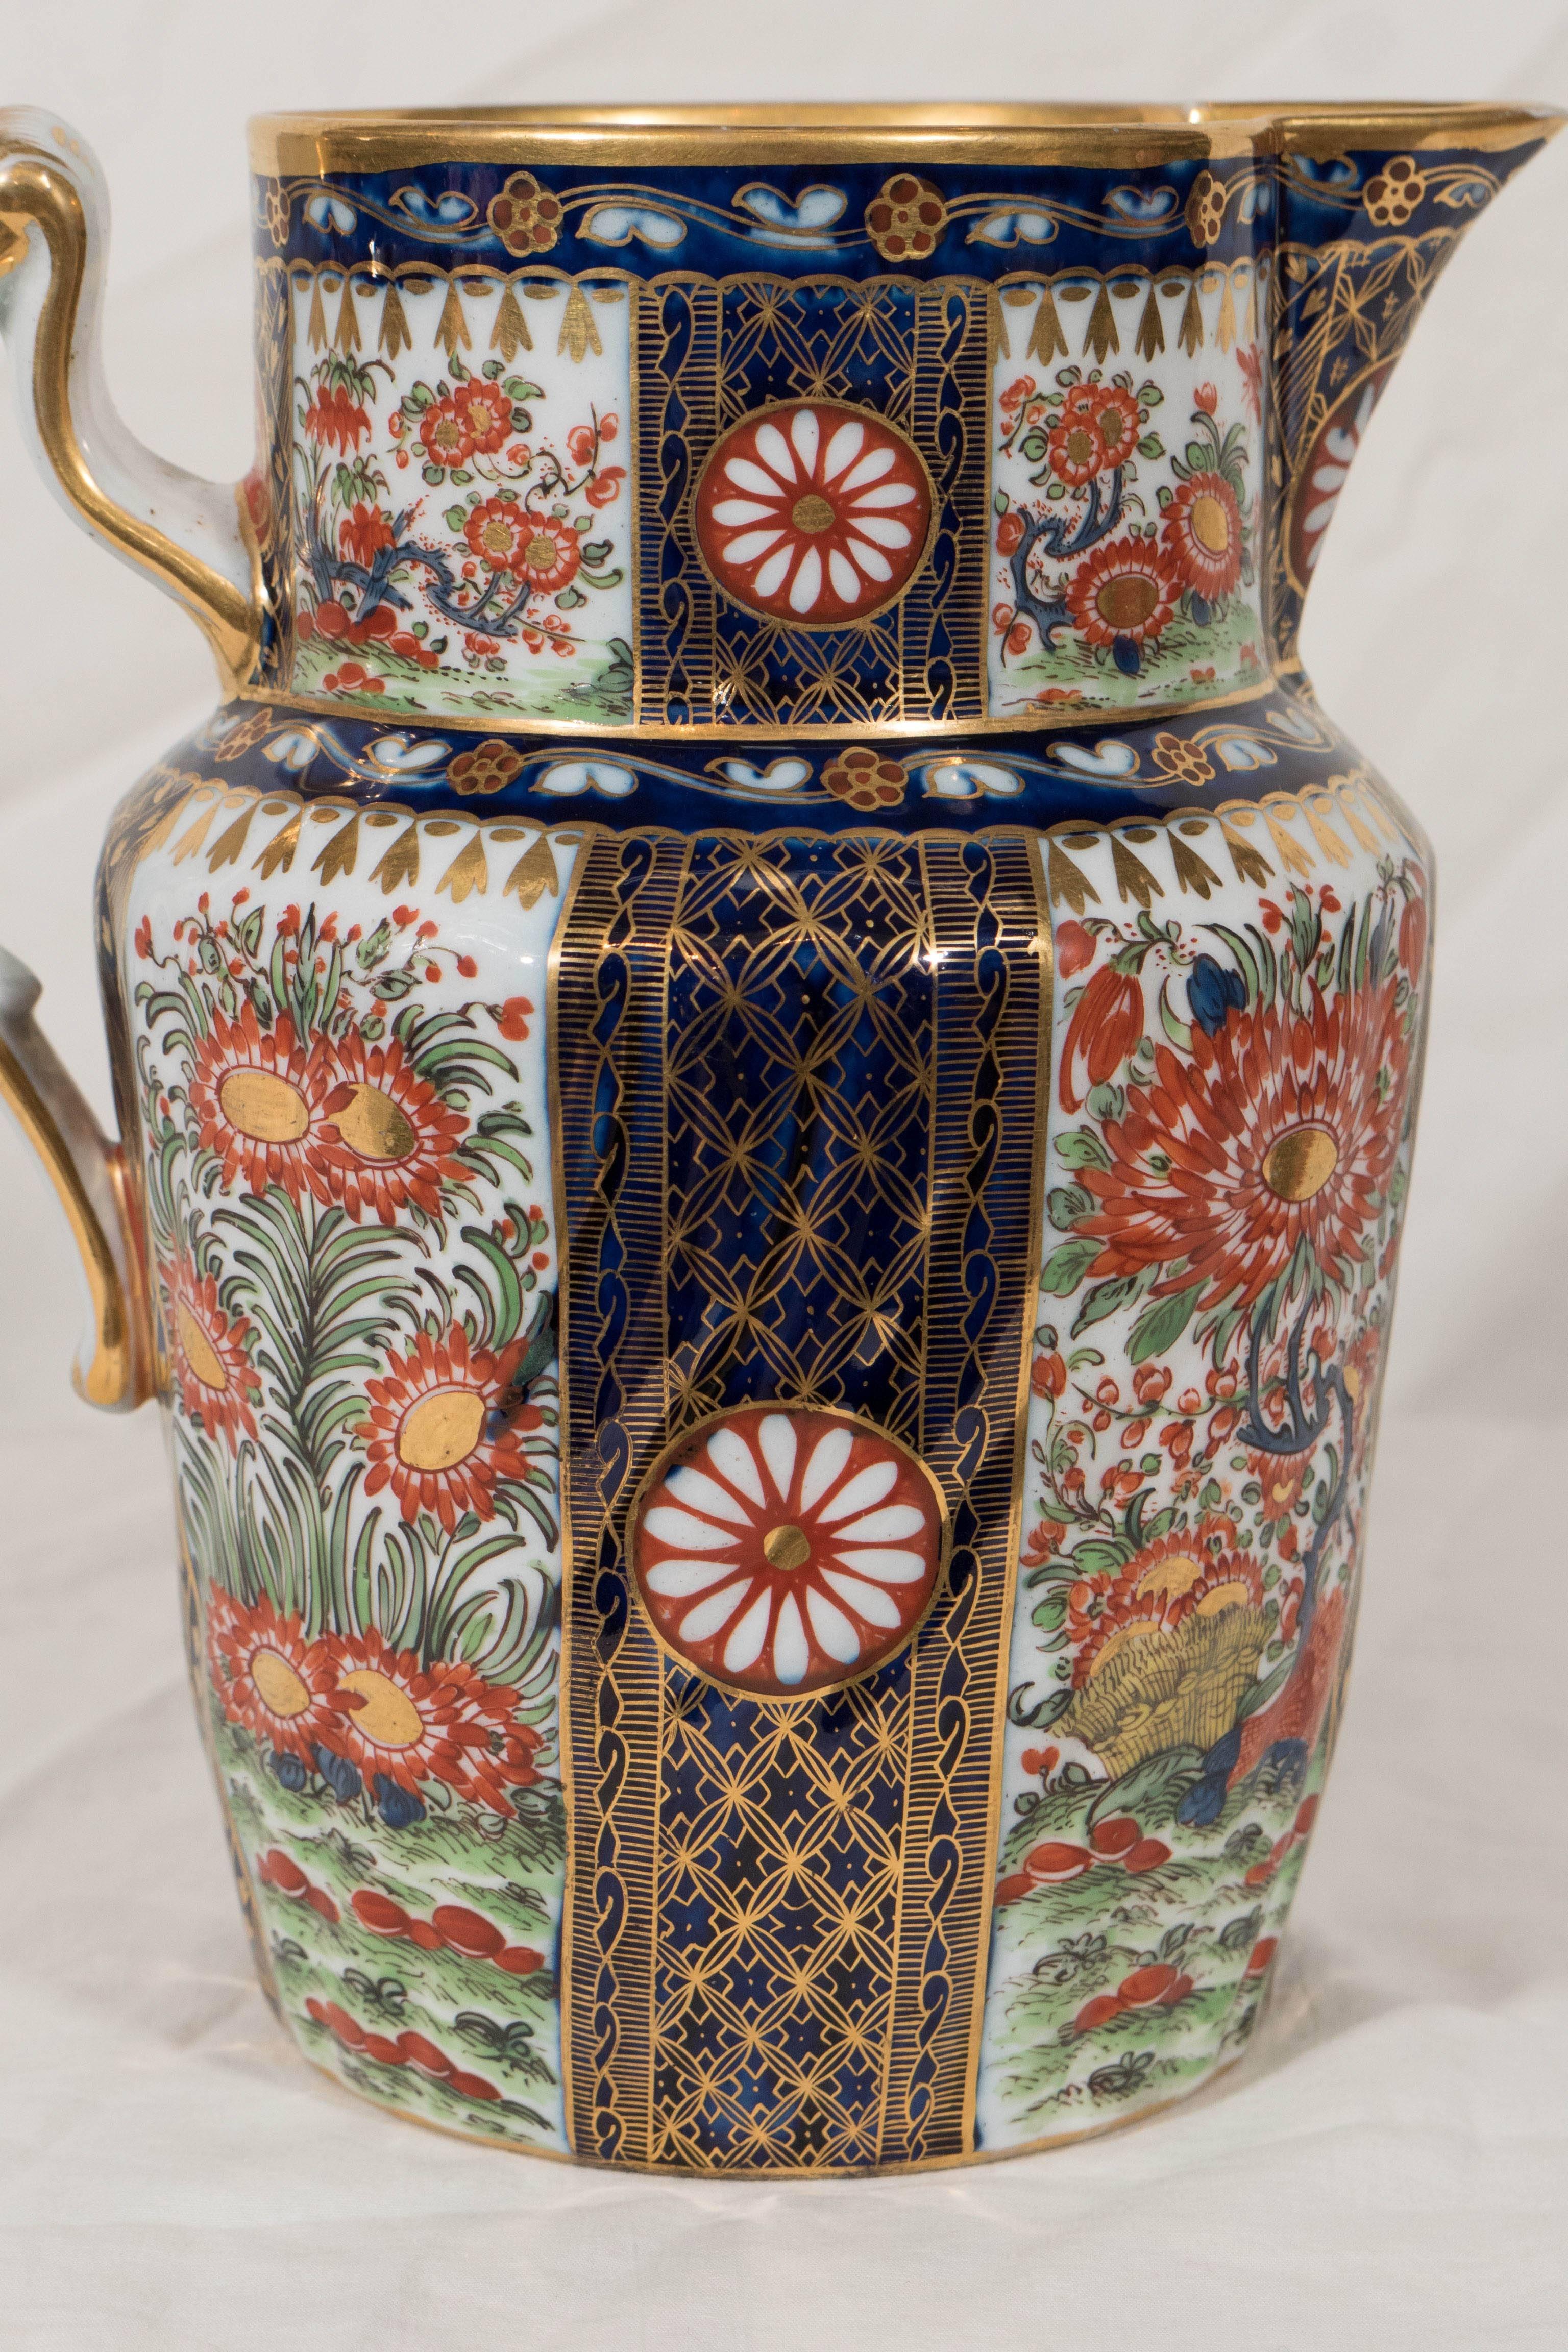 A vibrantly colored jug decorated with Chamberlain Worcester's 